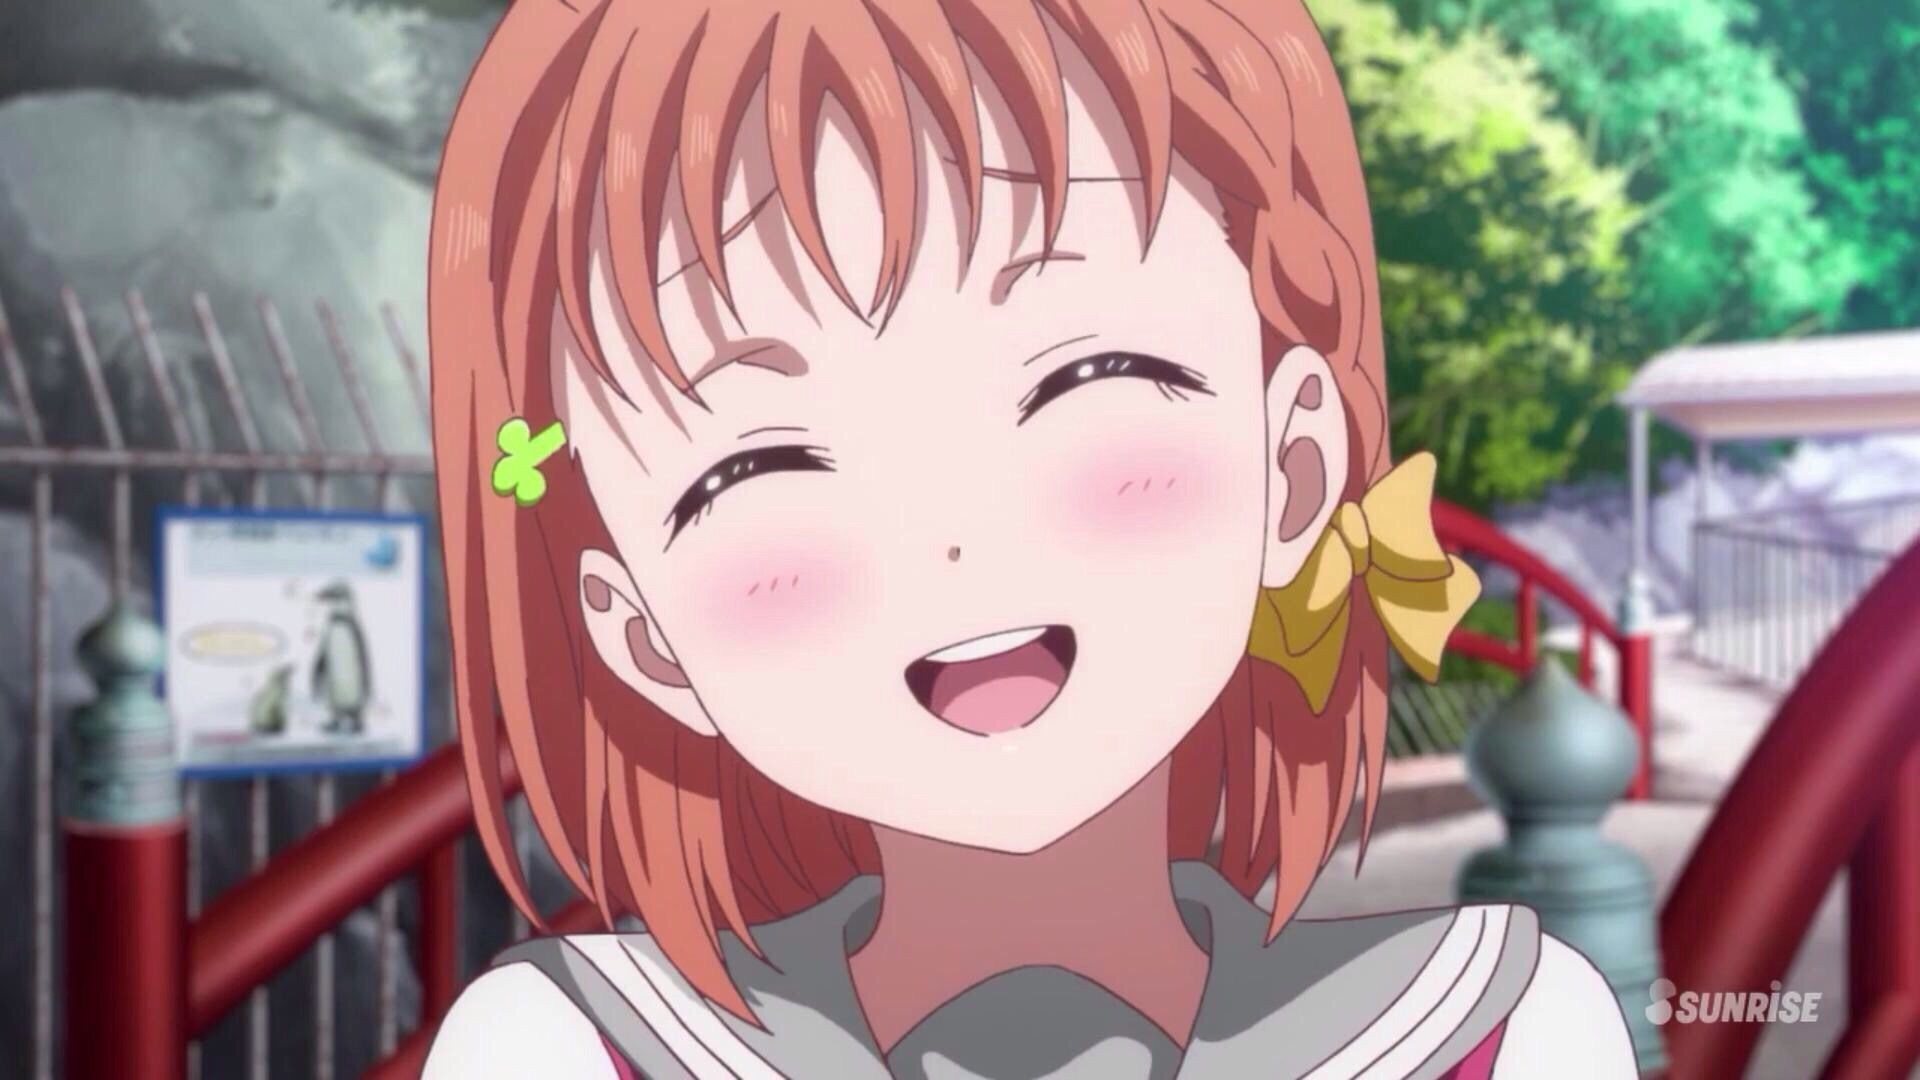 Oldyoung [Image] "love Live! Sunshine "1000 Songs She Bend Was Its Cute Scene Image Competitions Wwwwwwwwww Hole